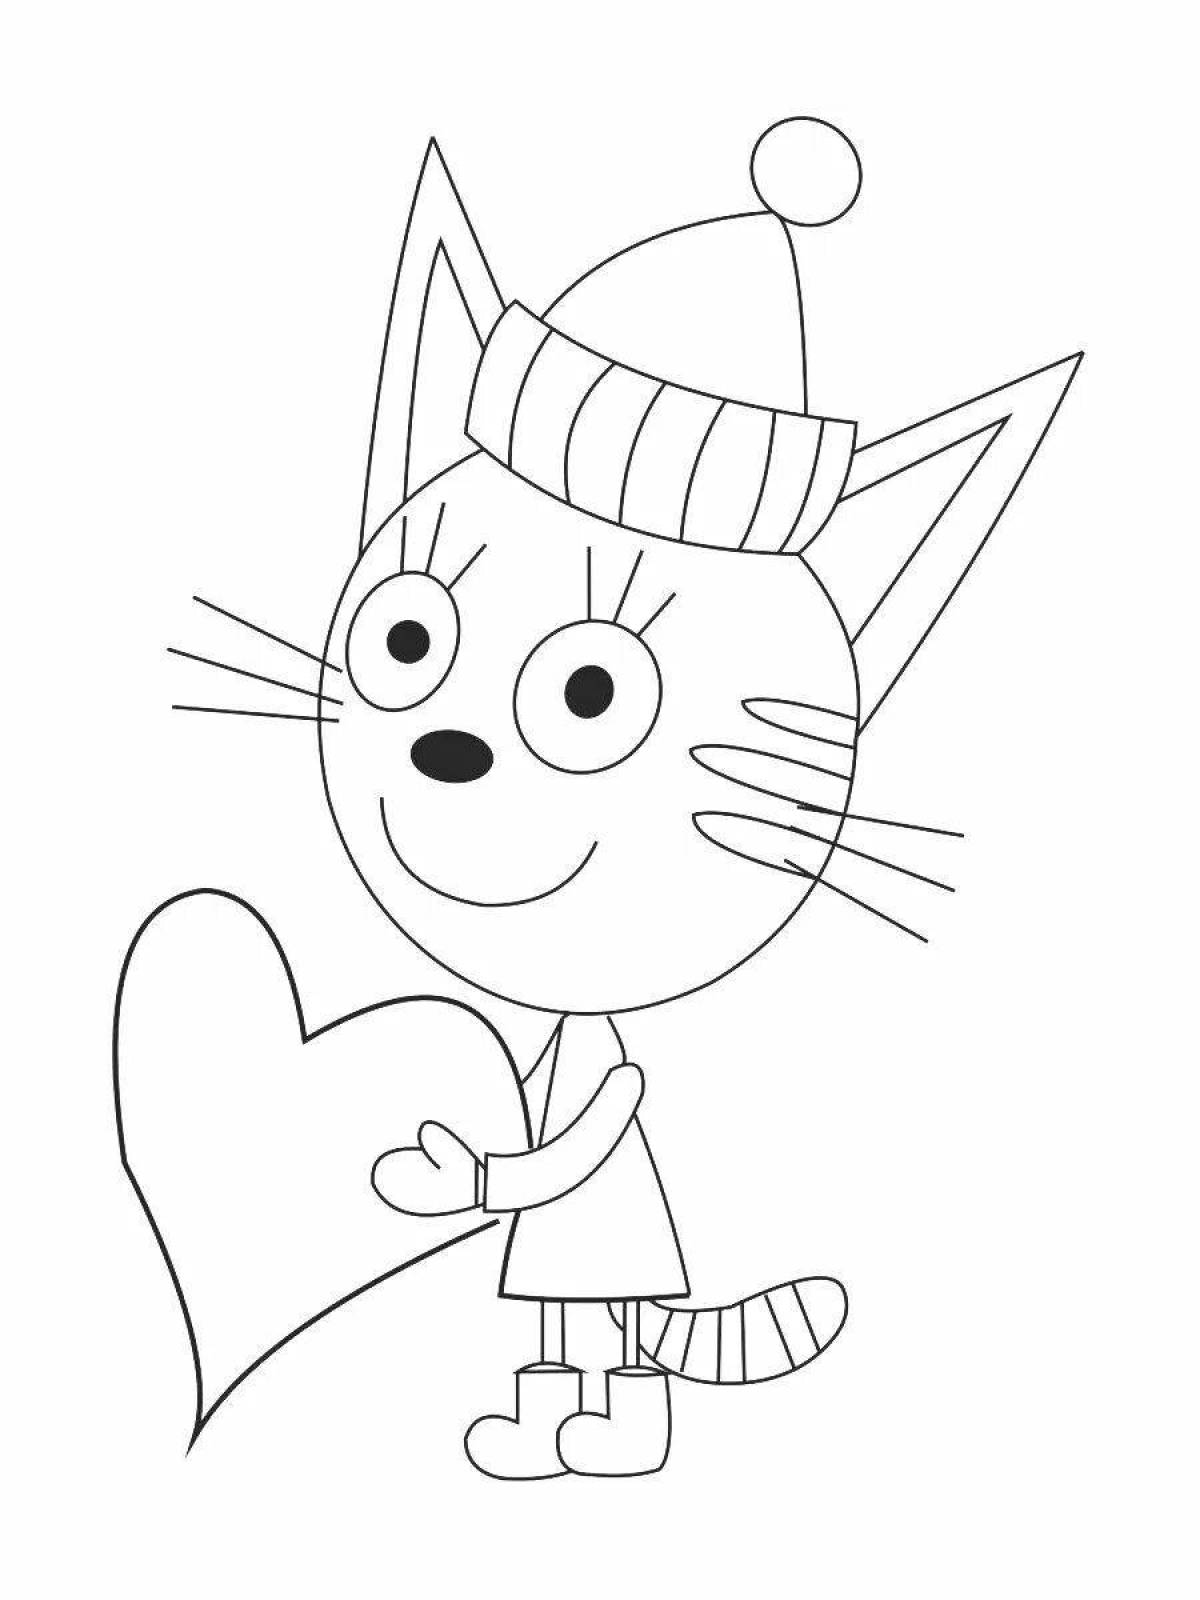 Animated coloring book dad three cats